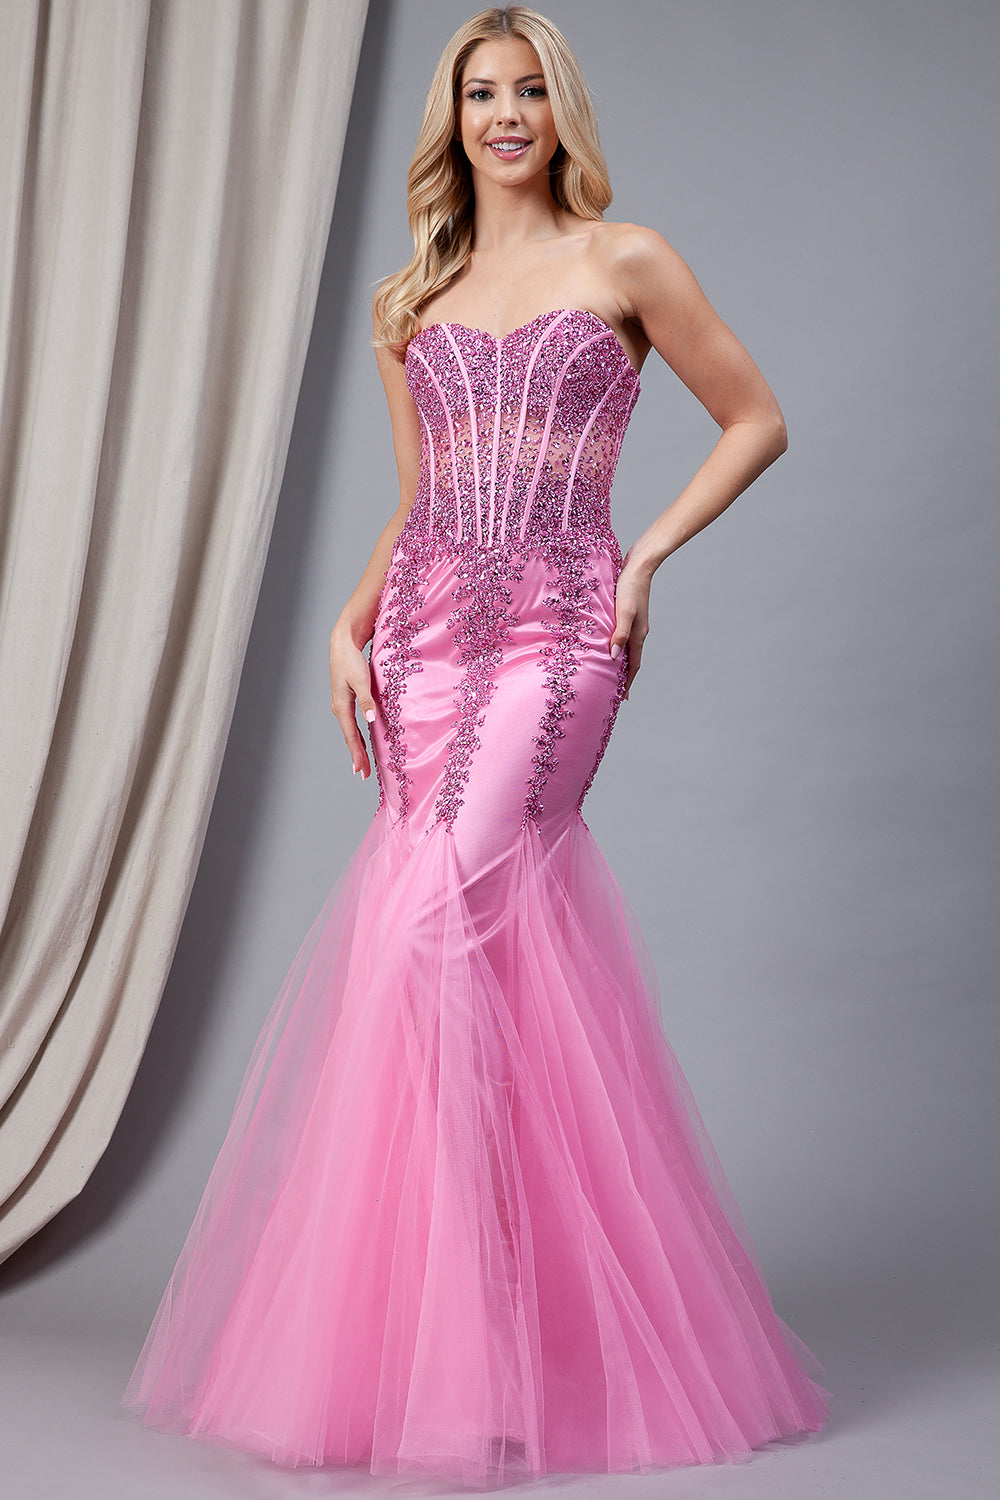 Strapless Sweetheart Embroidered Mermaid Wedding & Evening Dress-smcdress